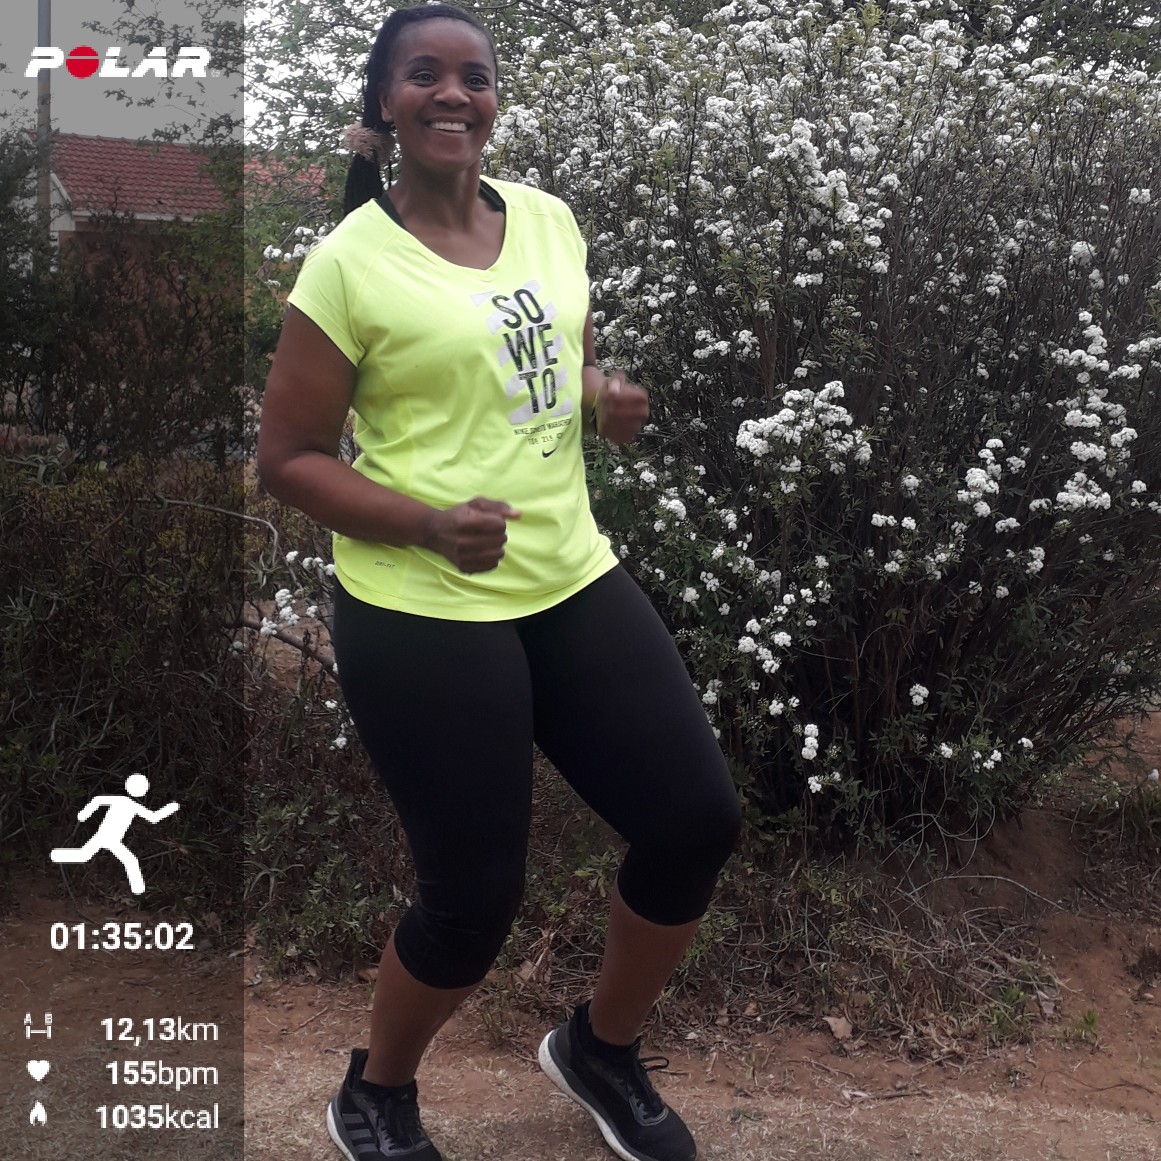 Afternoon run done..

#teamdhlaminisisters 
#teamfitness 
#runforlife 
#runningwoman 
#fitlife 
#flab2fit 
#fortheloveofrunning 
#RWFL_Middelburg
#RunningWithLulubel 
#RunningWithTumiSole
#FetchYourBody2020 
#Finishing2020Healthy
#PolarM430